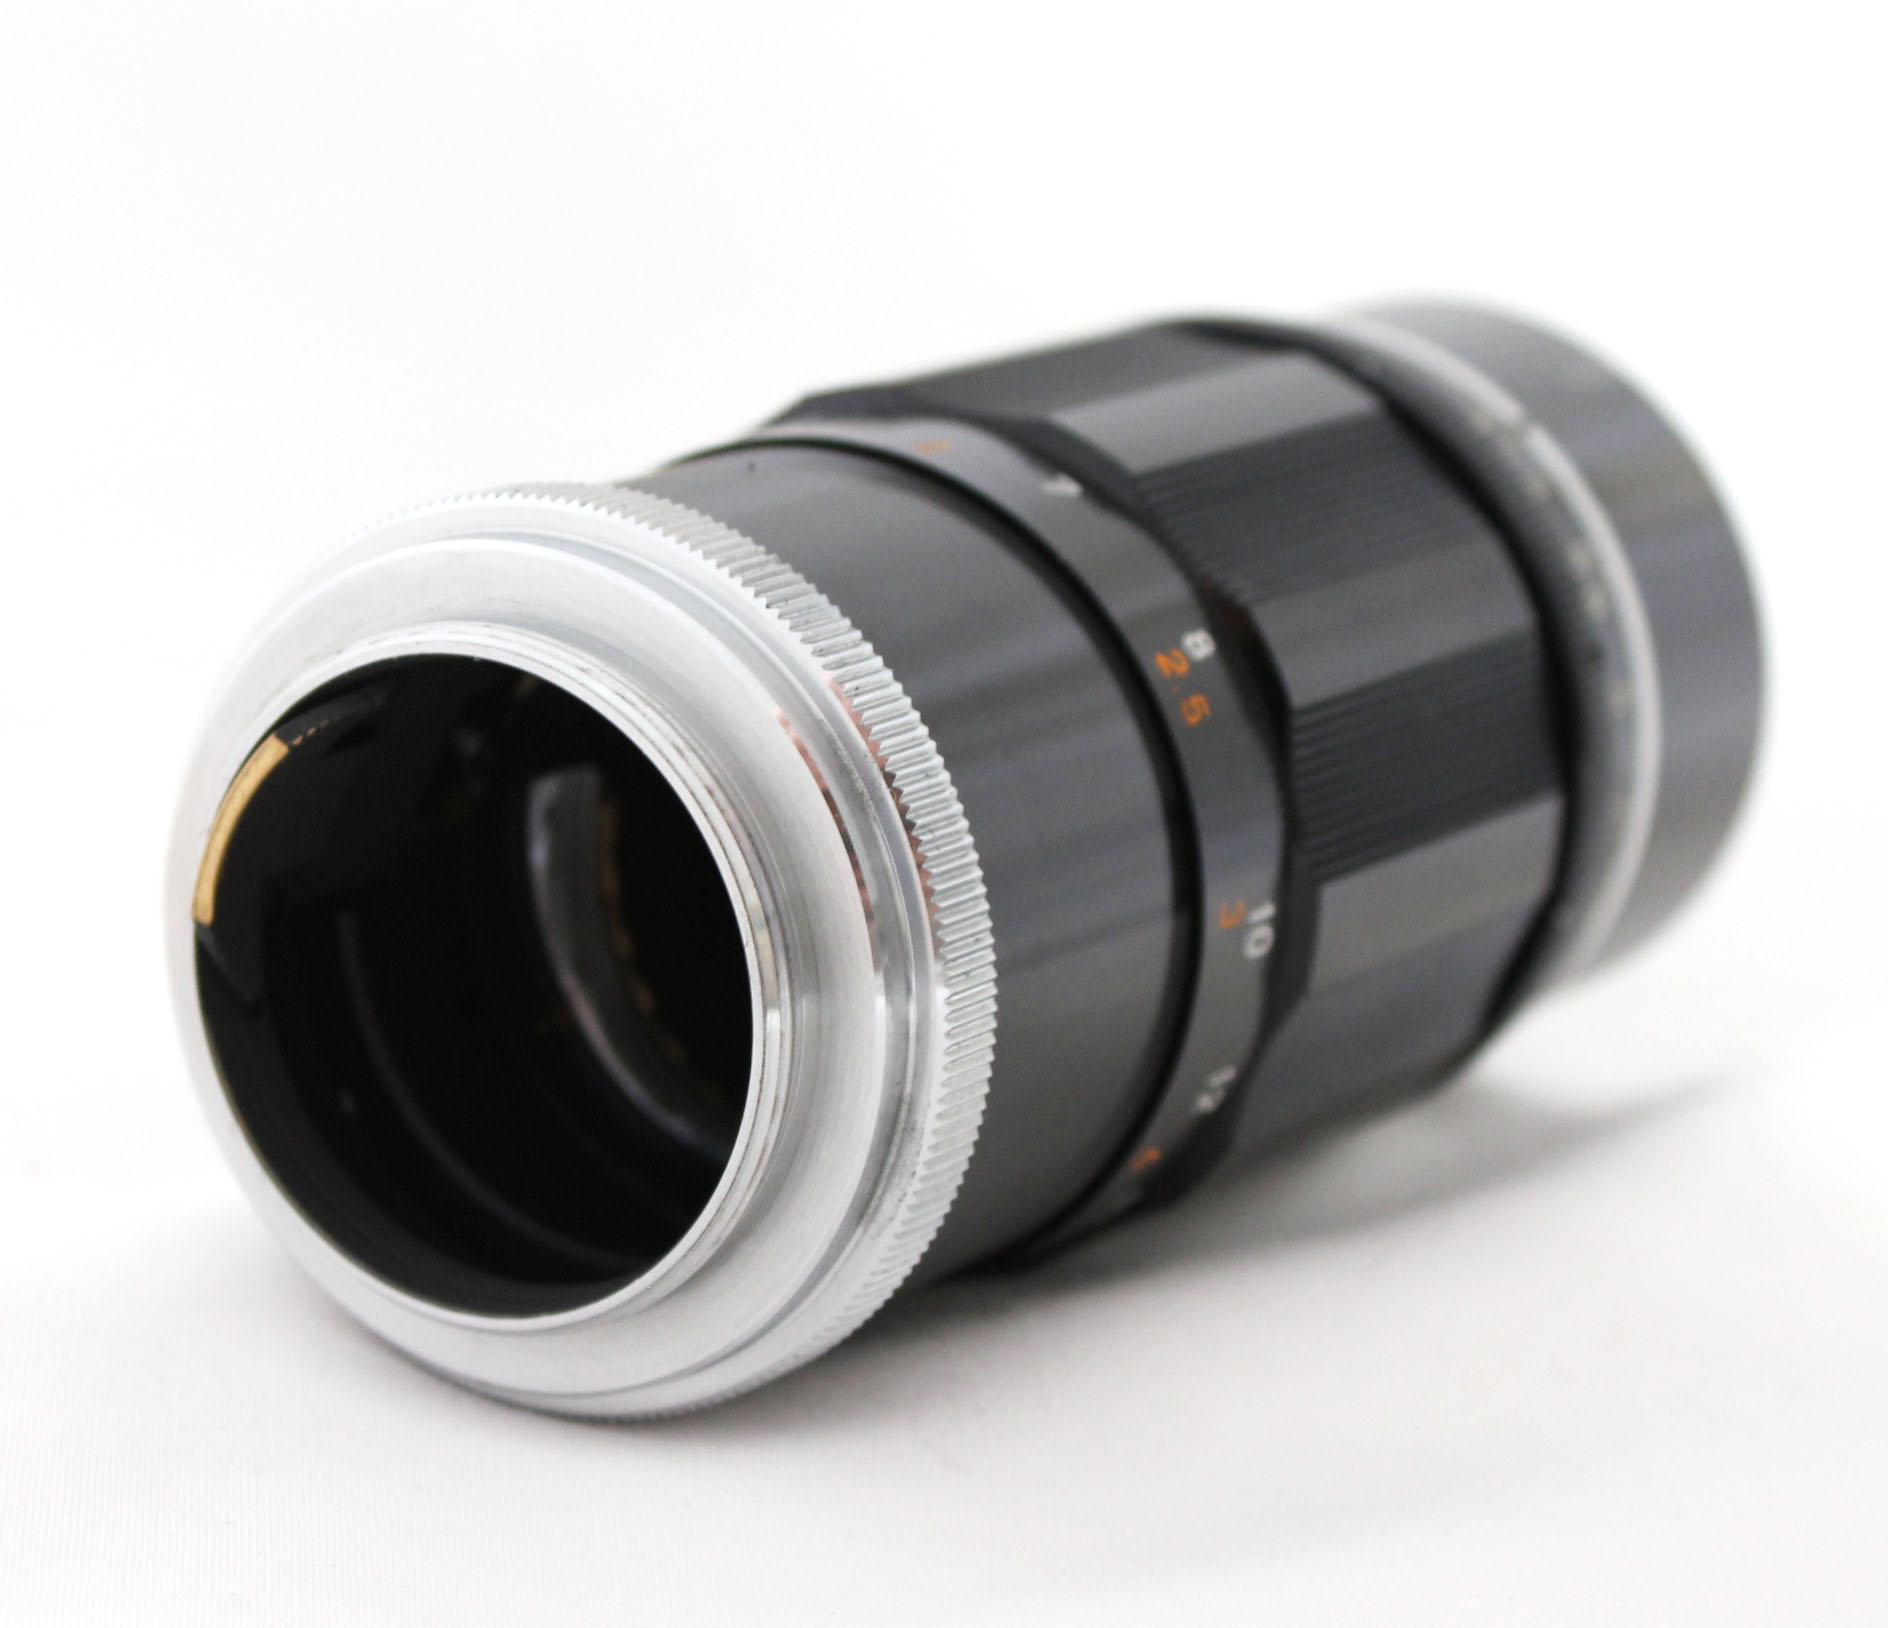  Canon 135mm F/3.5 L39 LTM Leica Screw Mount Lens from Japan Photo 2